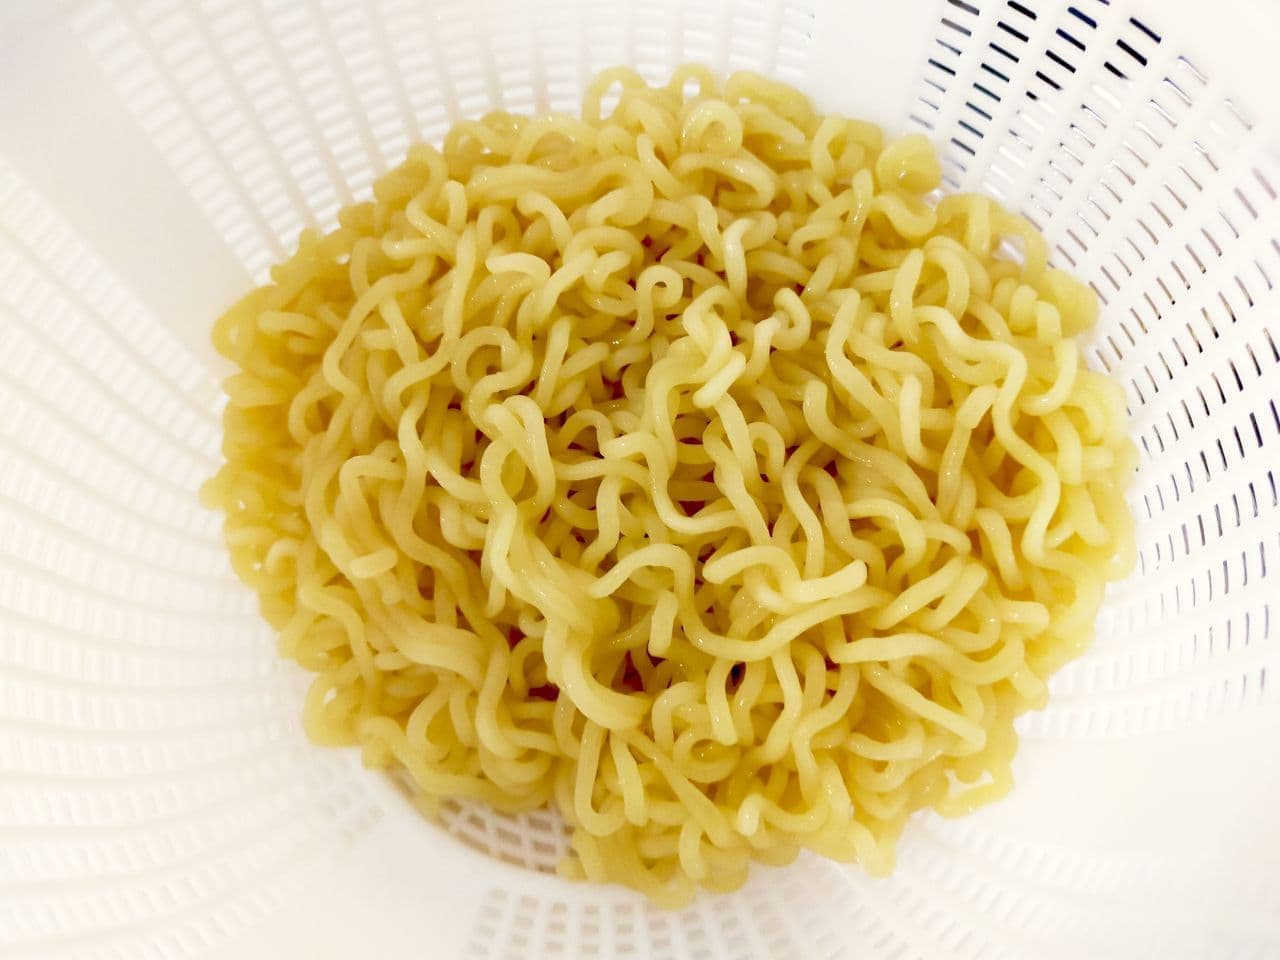 "Chilled spicy ramen without juice" recipe